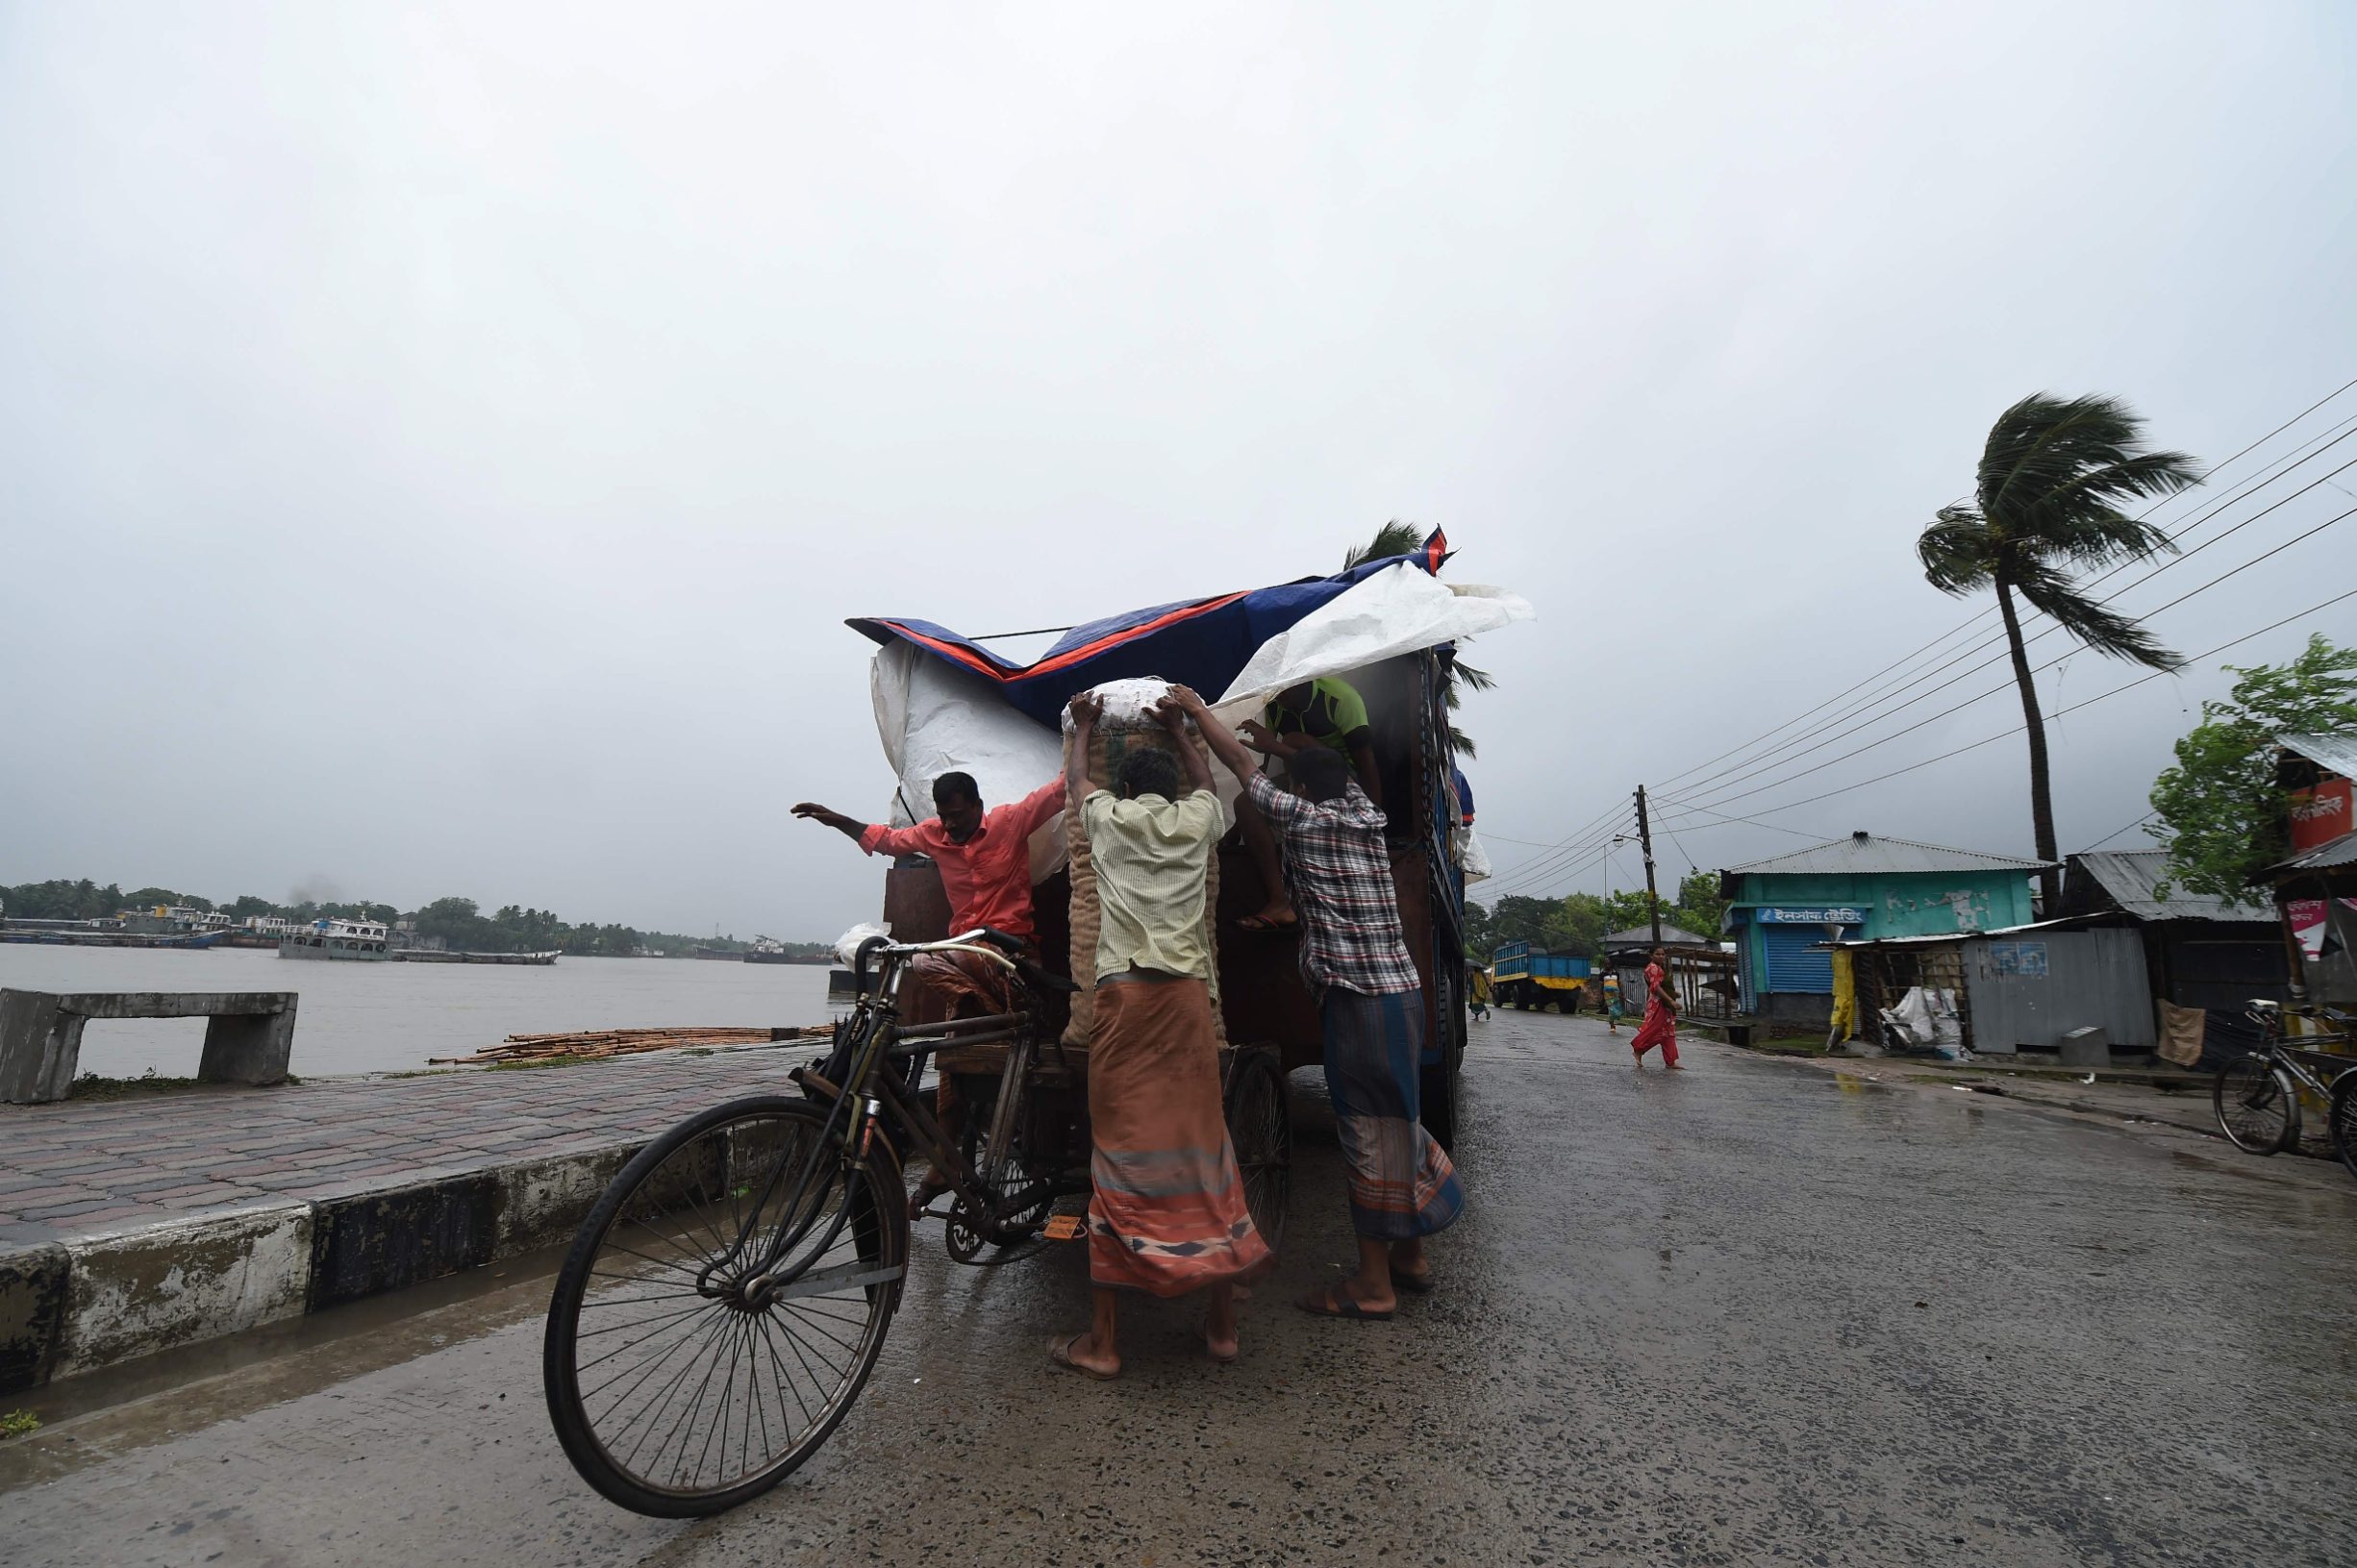 TOPSHOT - Workers unload goods from a truck ahead of the expected landfall of cyclone Amphan, in Khulna on May 20, 2020. - Several million people were taking shelter and praying for the best on Wednesday as the Bay of Bengal's fiercest cyclone in decades roared towards Bangladesh and eastern India, with forecasts of a potentially devastating and deadly storm surge. Authorities have scrambled to evacuate low lying areas in the path of Amphan, which is only the second 